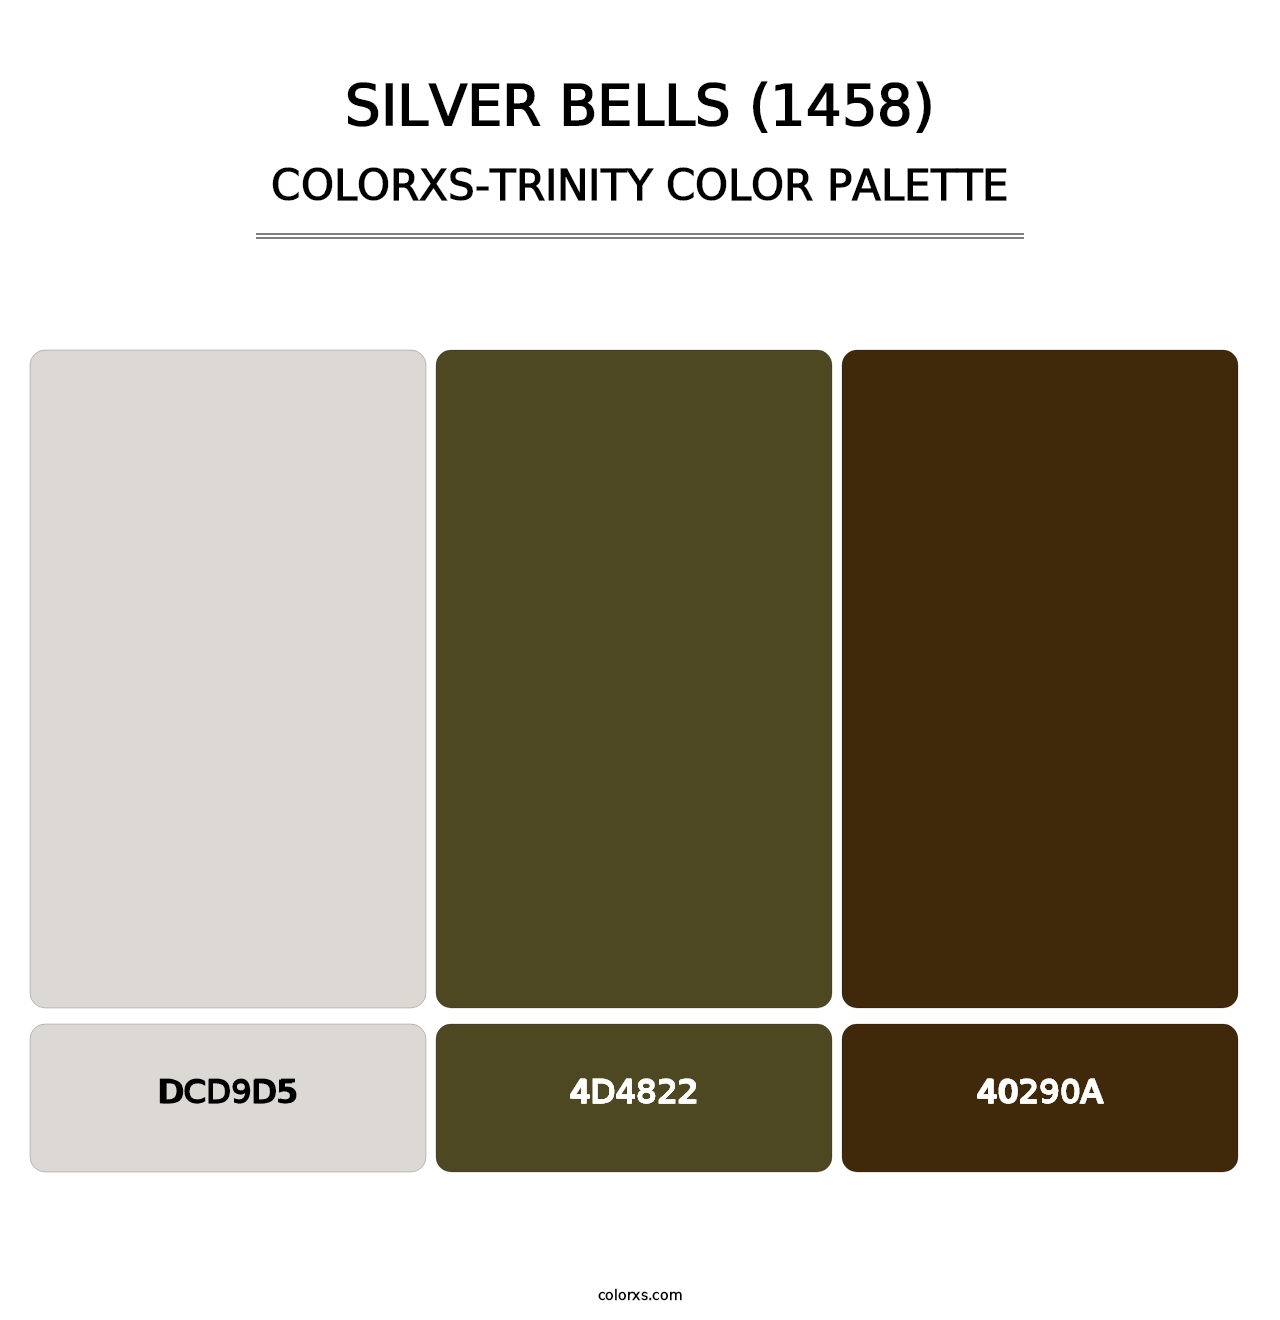 Silver Bells (1458) - Colorxs Trinity Palette